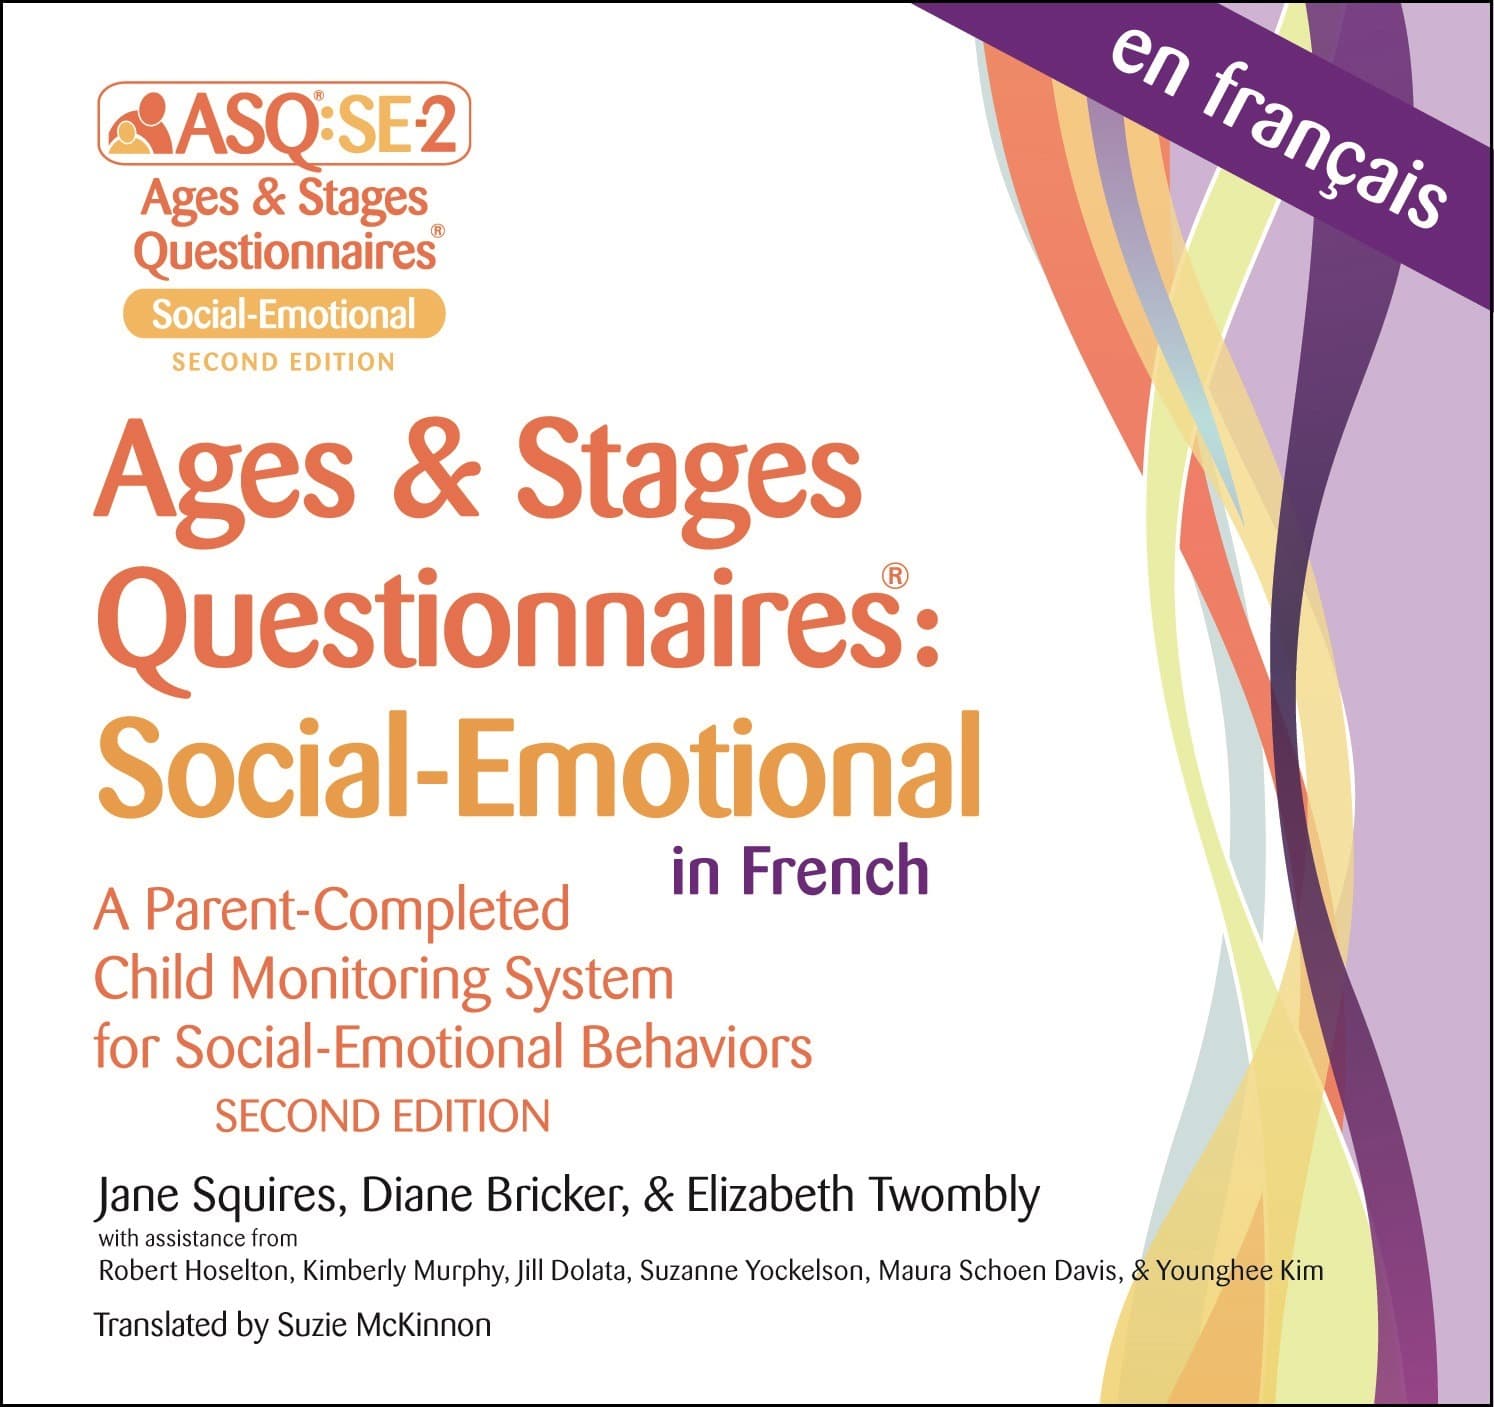 ages-and-stages-questionnaire-pdf-18-months-daysi-crouch